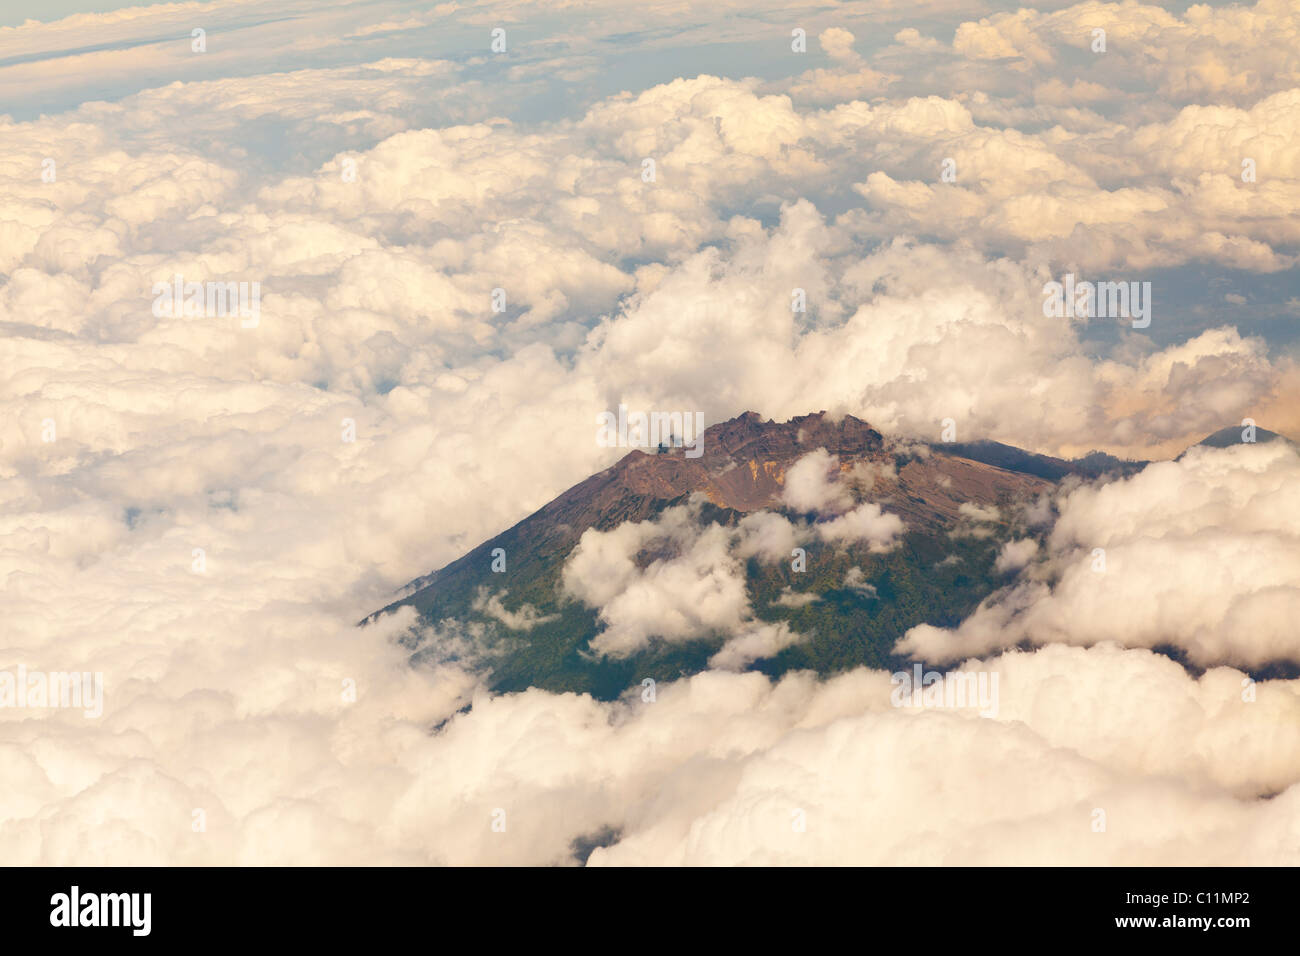 Aerial view through clouds of one of several volcanoes on Bali island, Indonesia Stock Photo